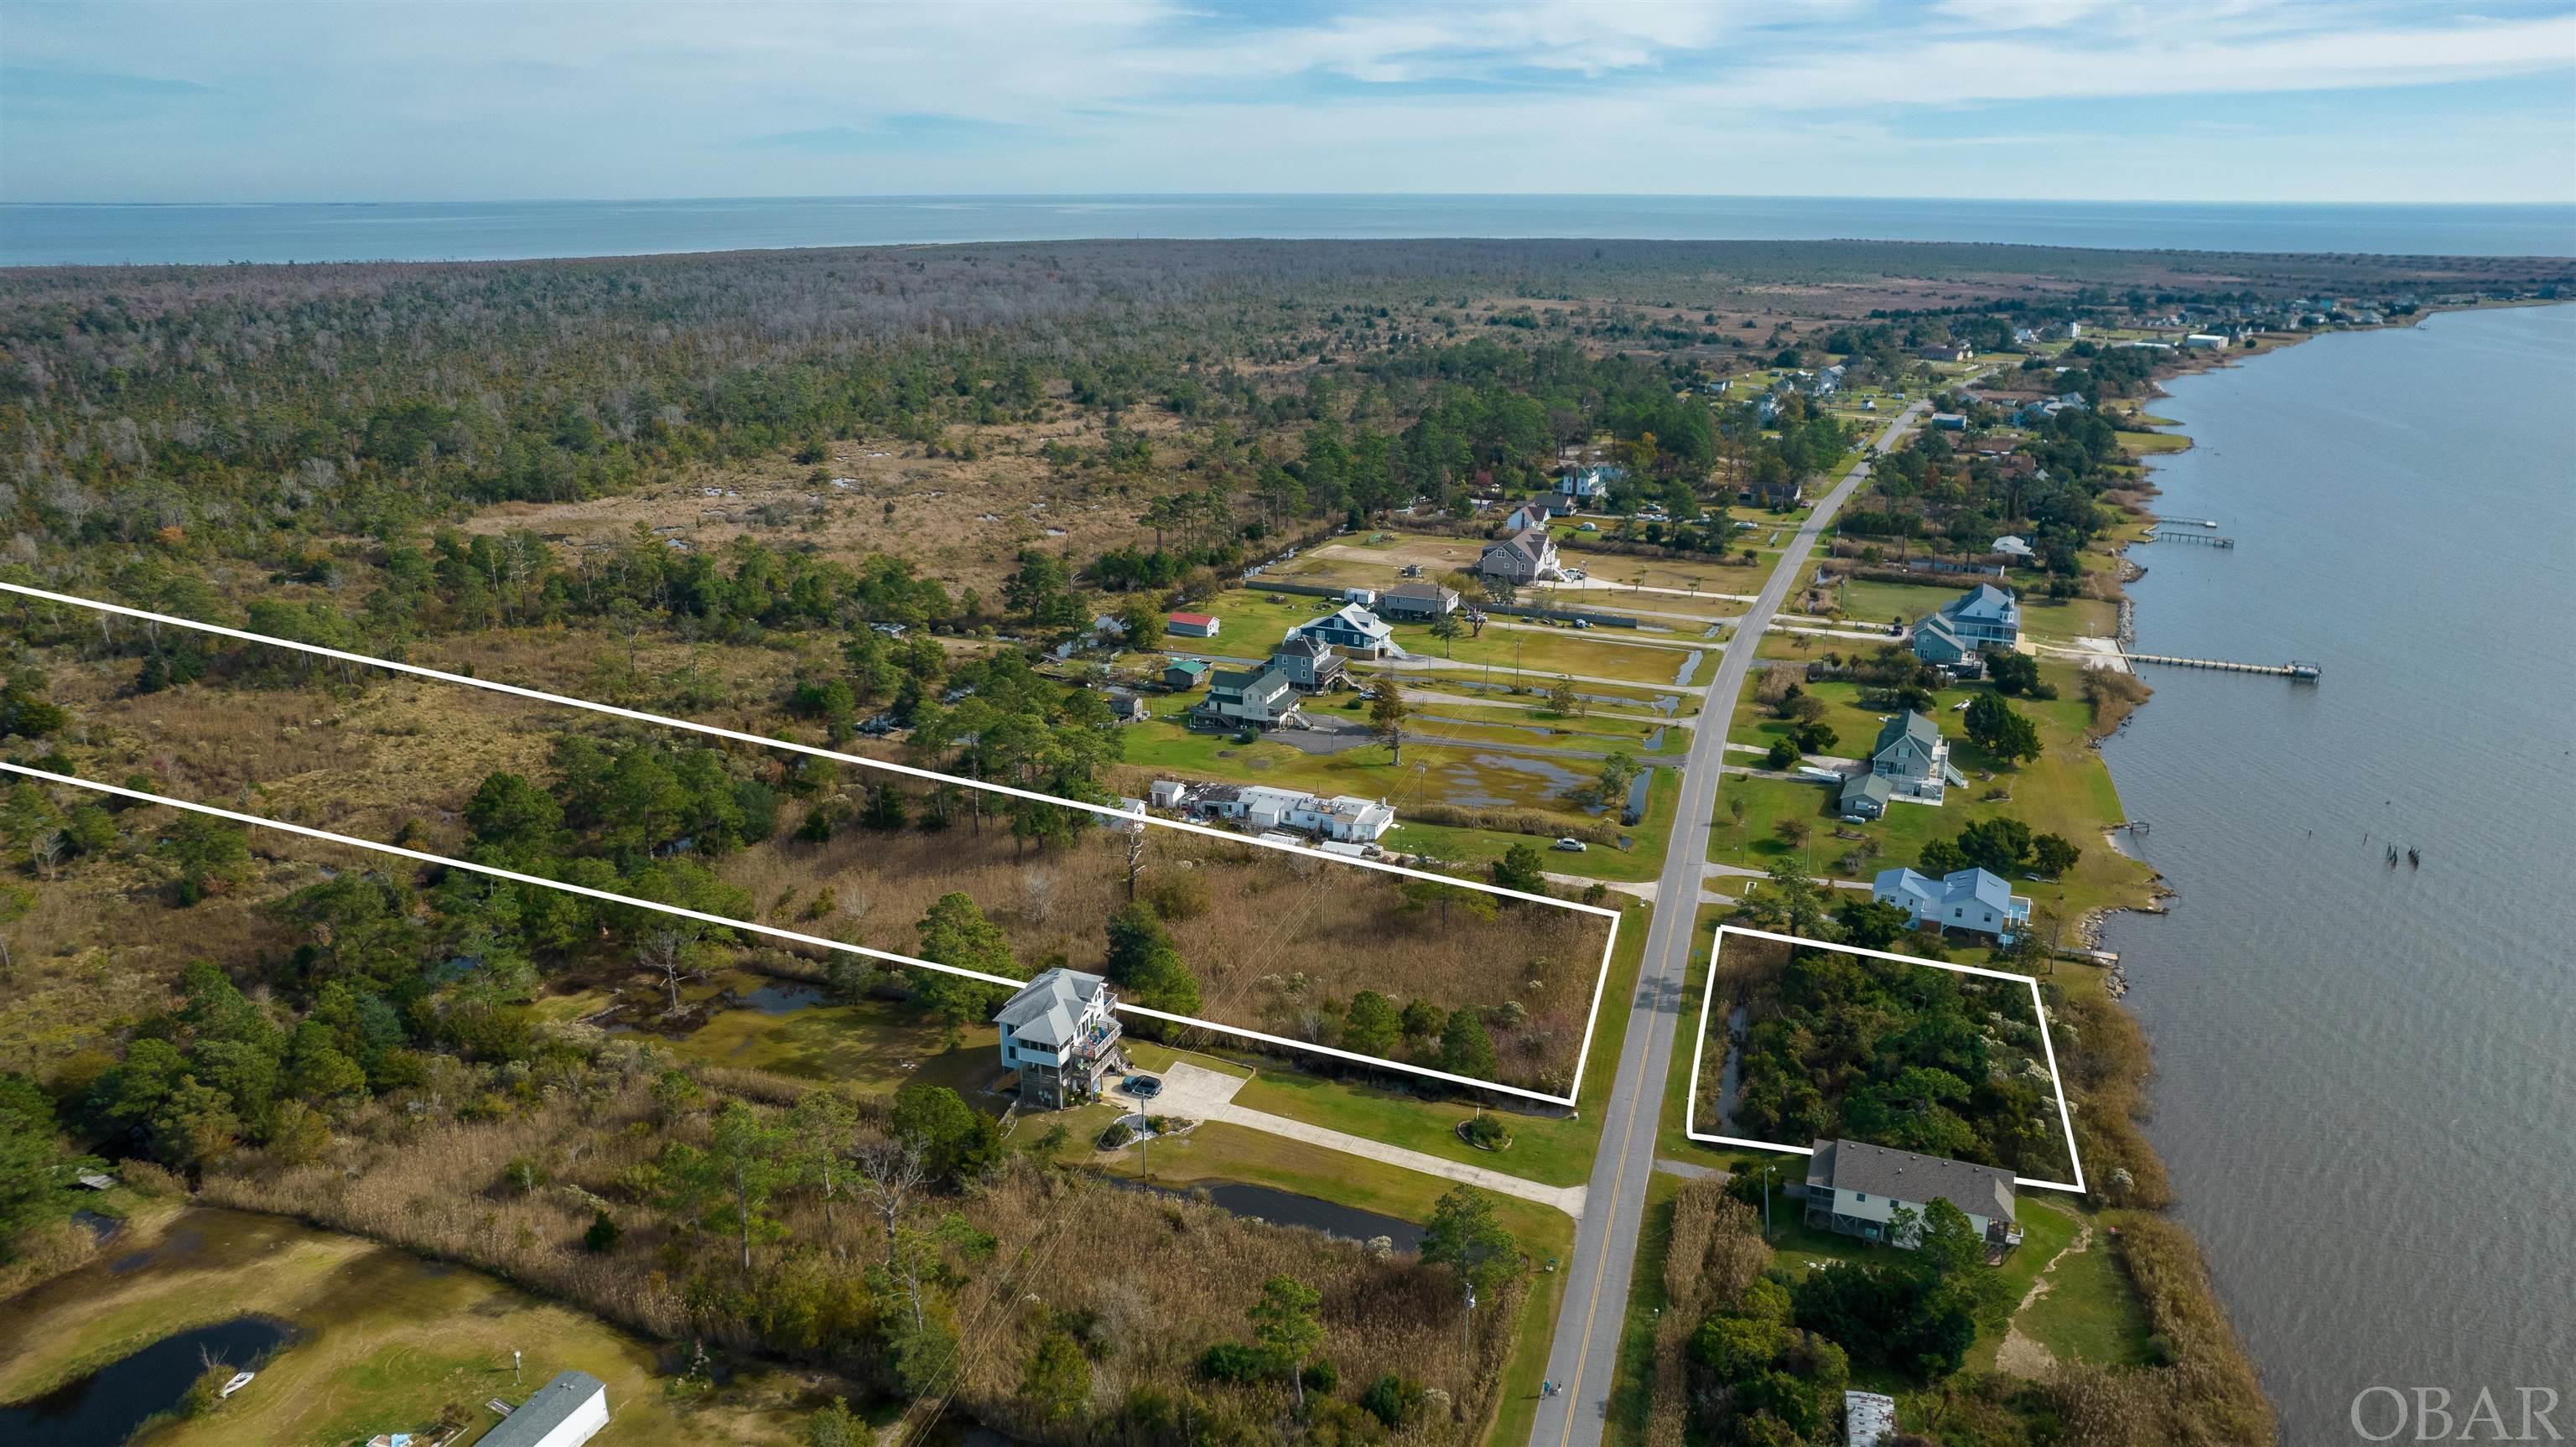 170 Bayview Drive, Stumpy Point, NC 27978, ,Lots/land,For sale,Bayview Drive,120842